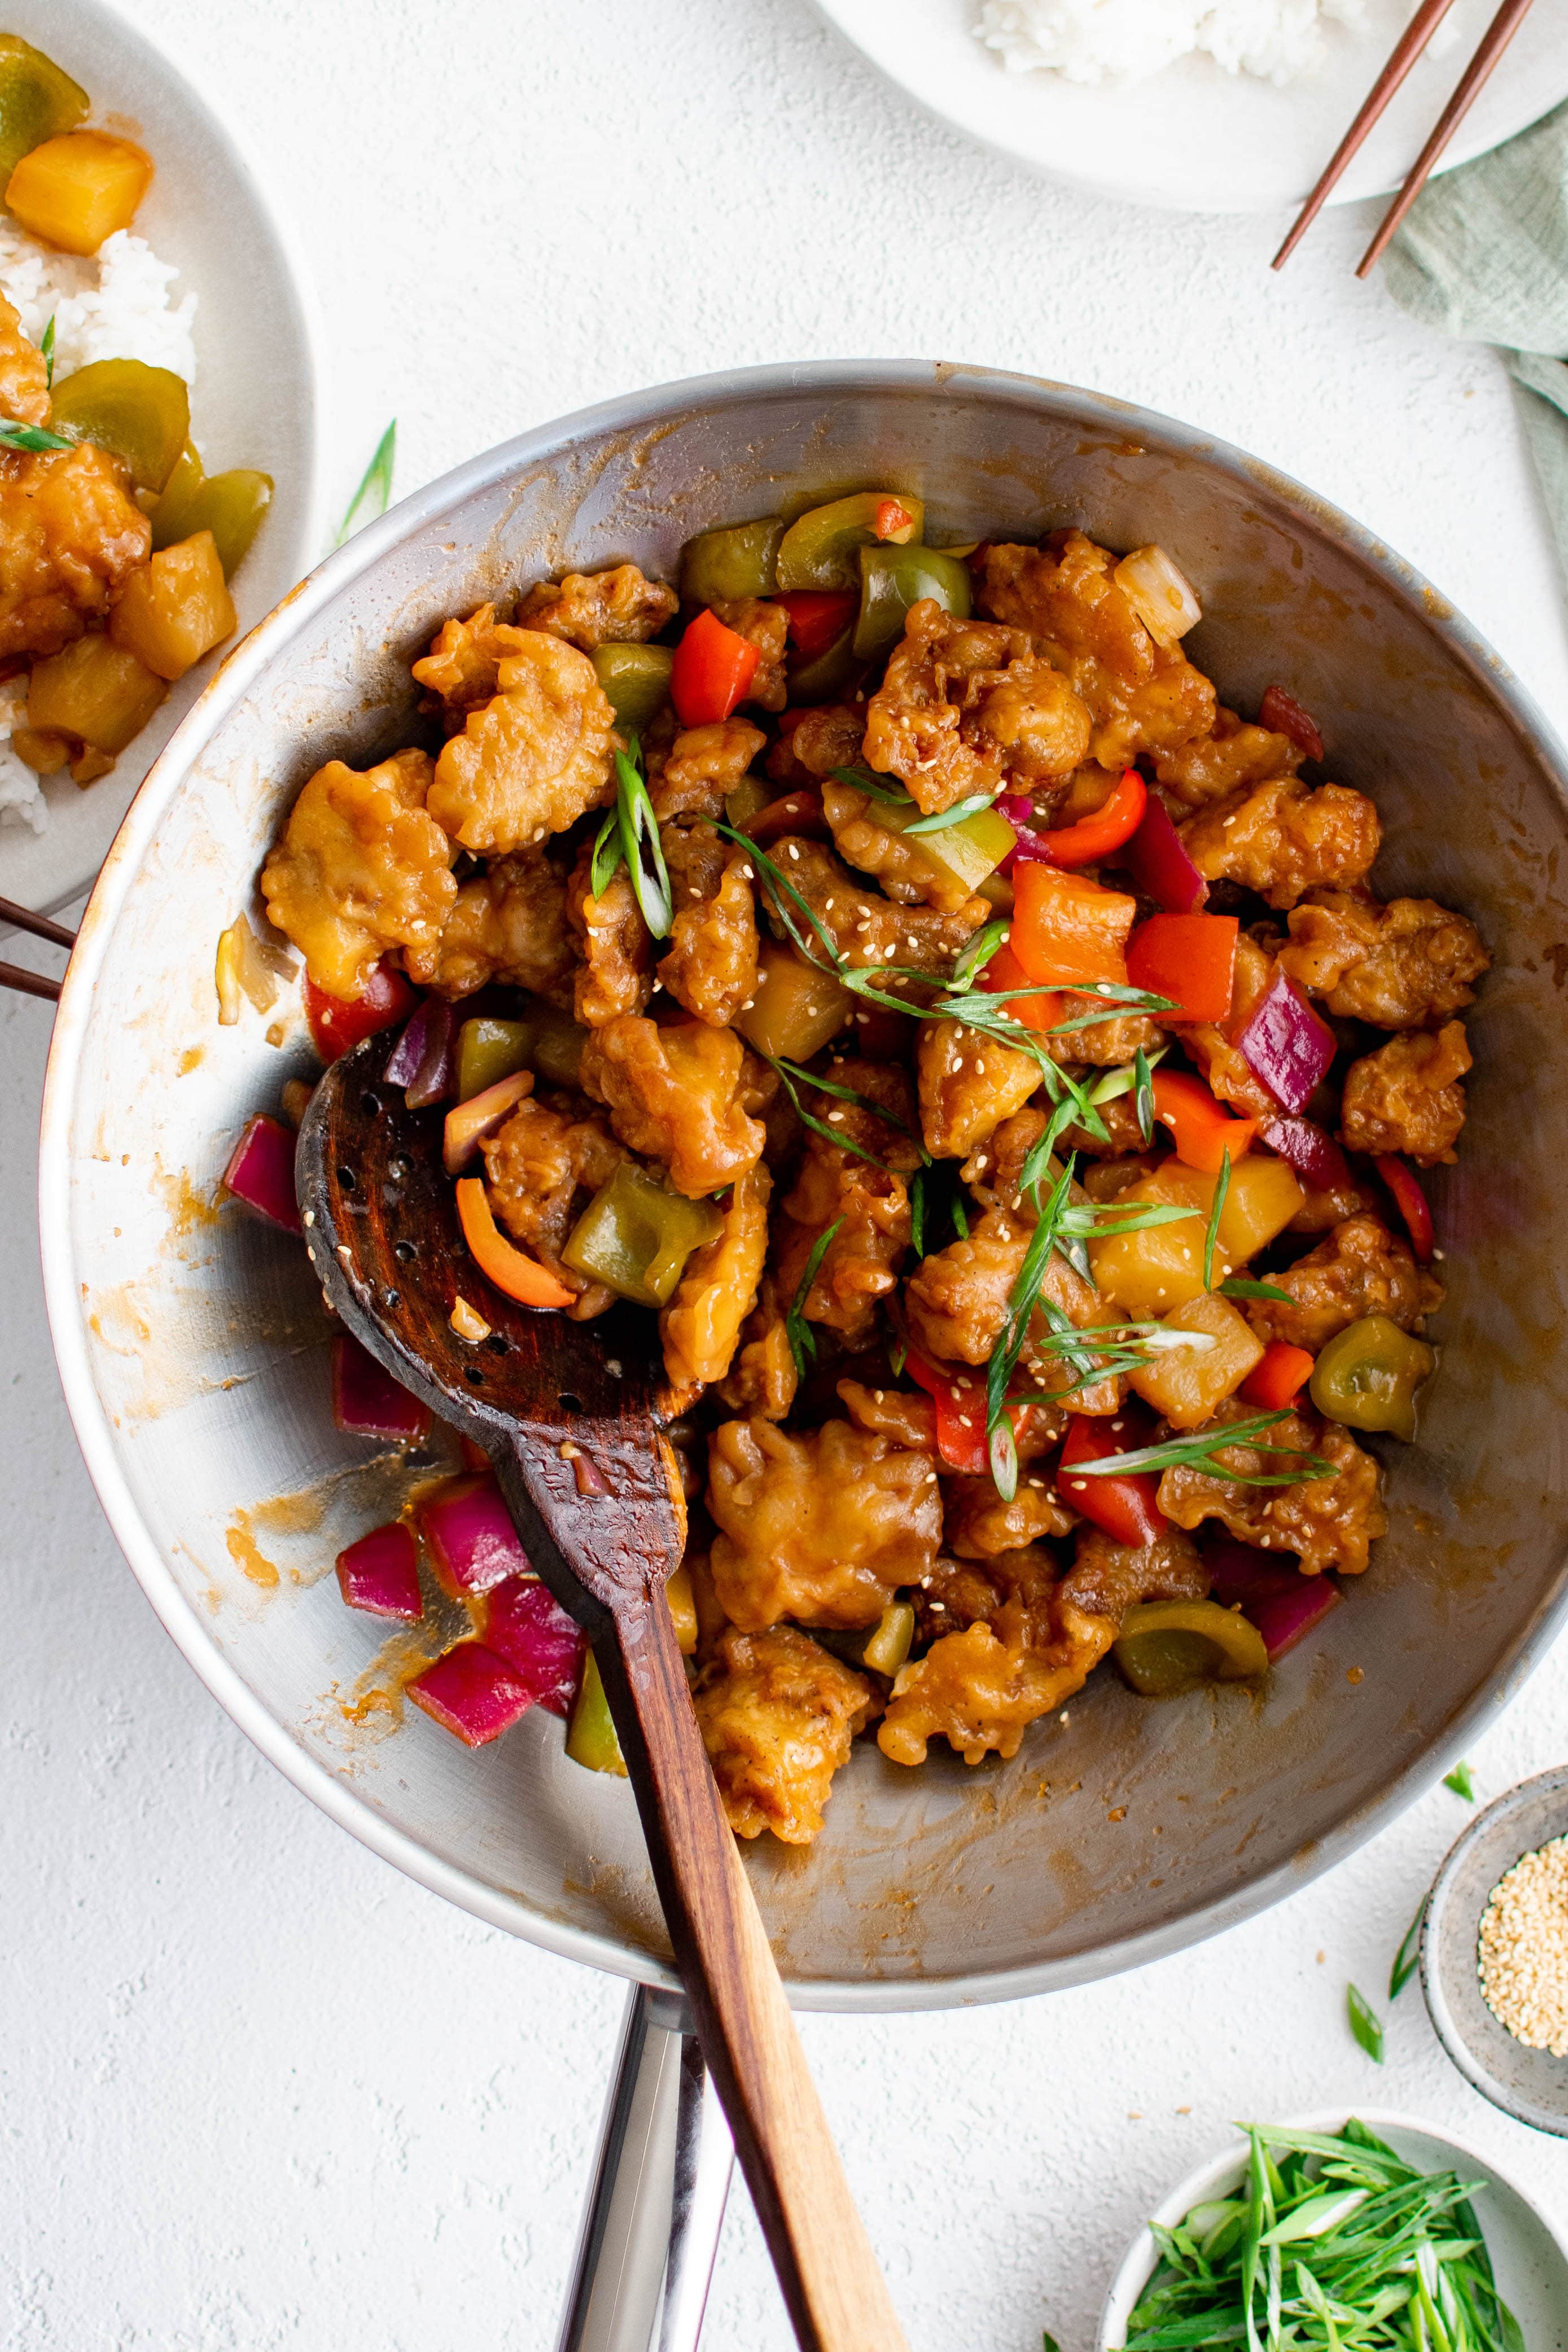 Large wok filled with vibrant sweet and sour chicken with bell peppers and pineapple.